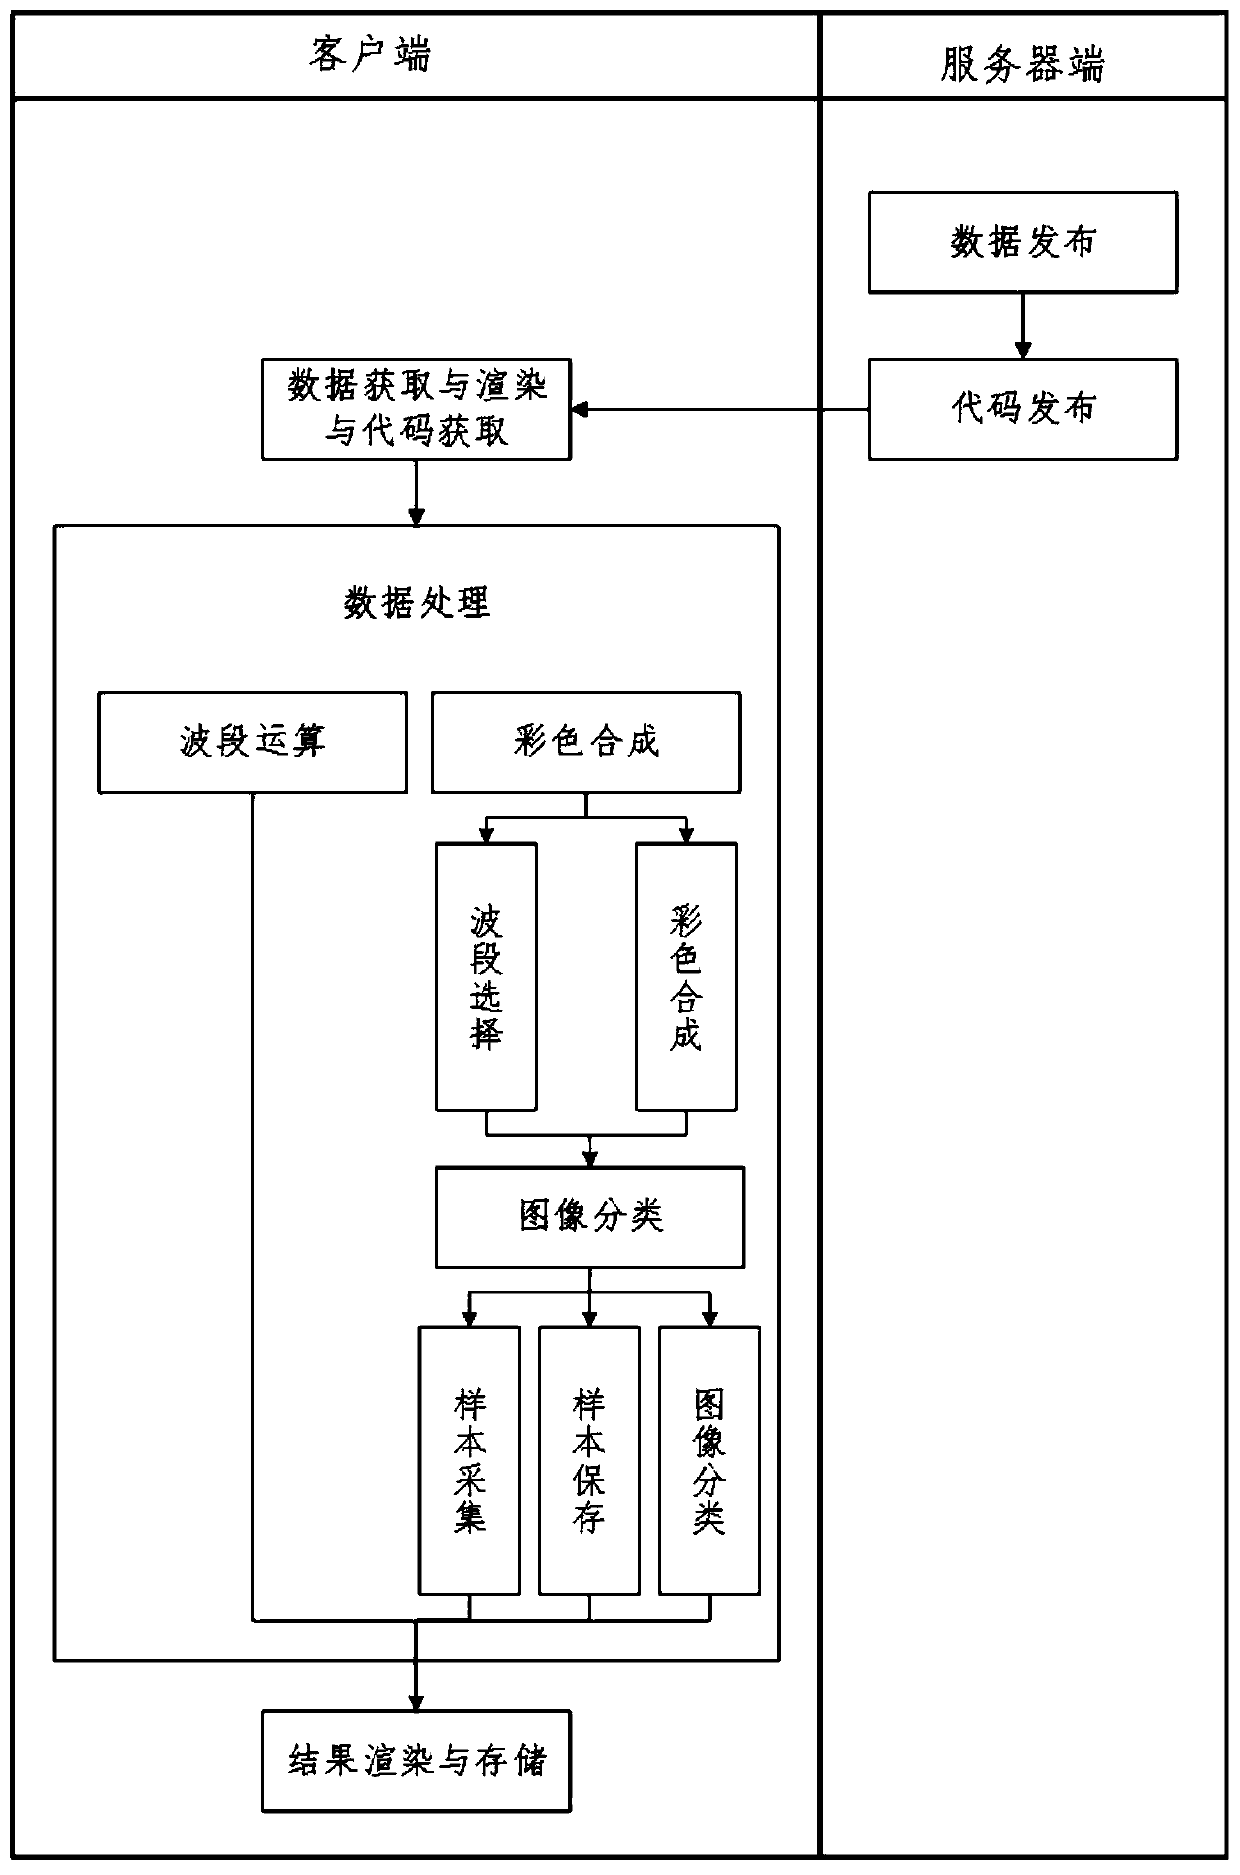 A mobile terminal-based remote sensing image data processing system and data processing method